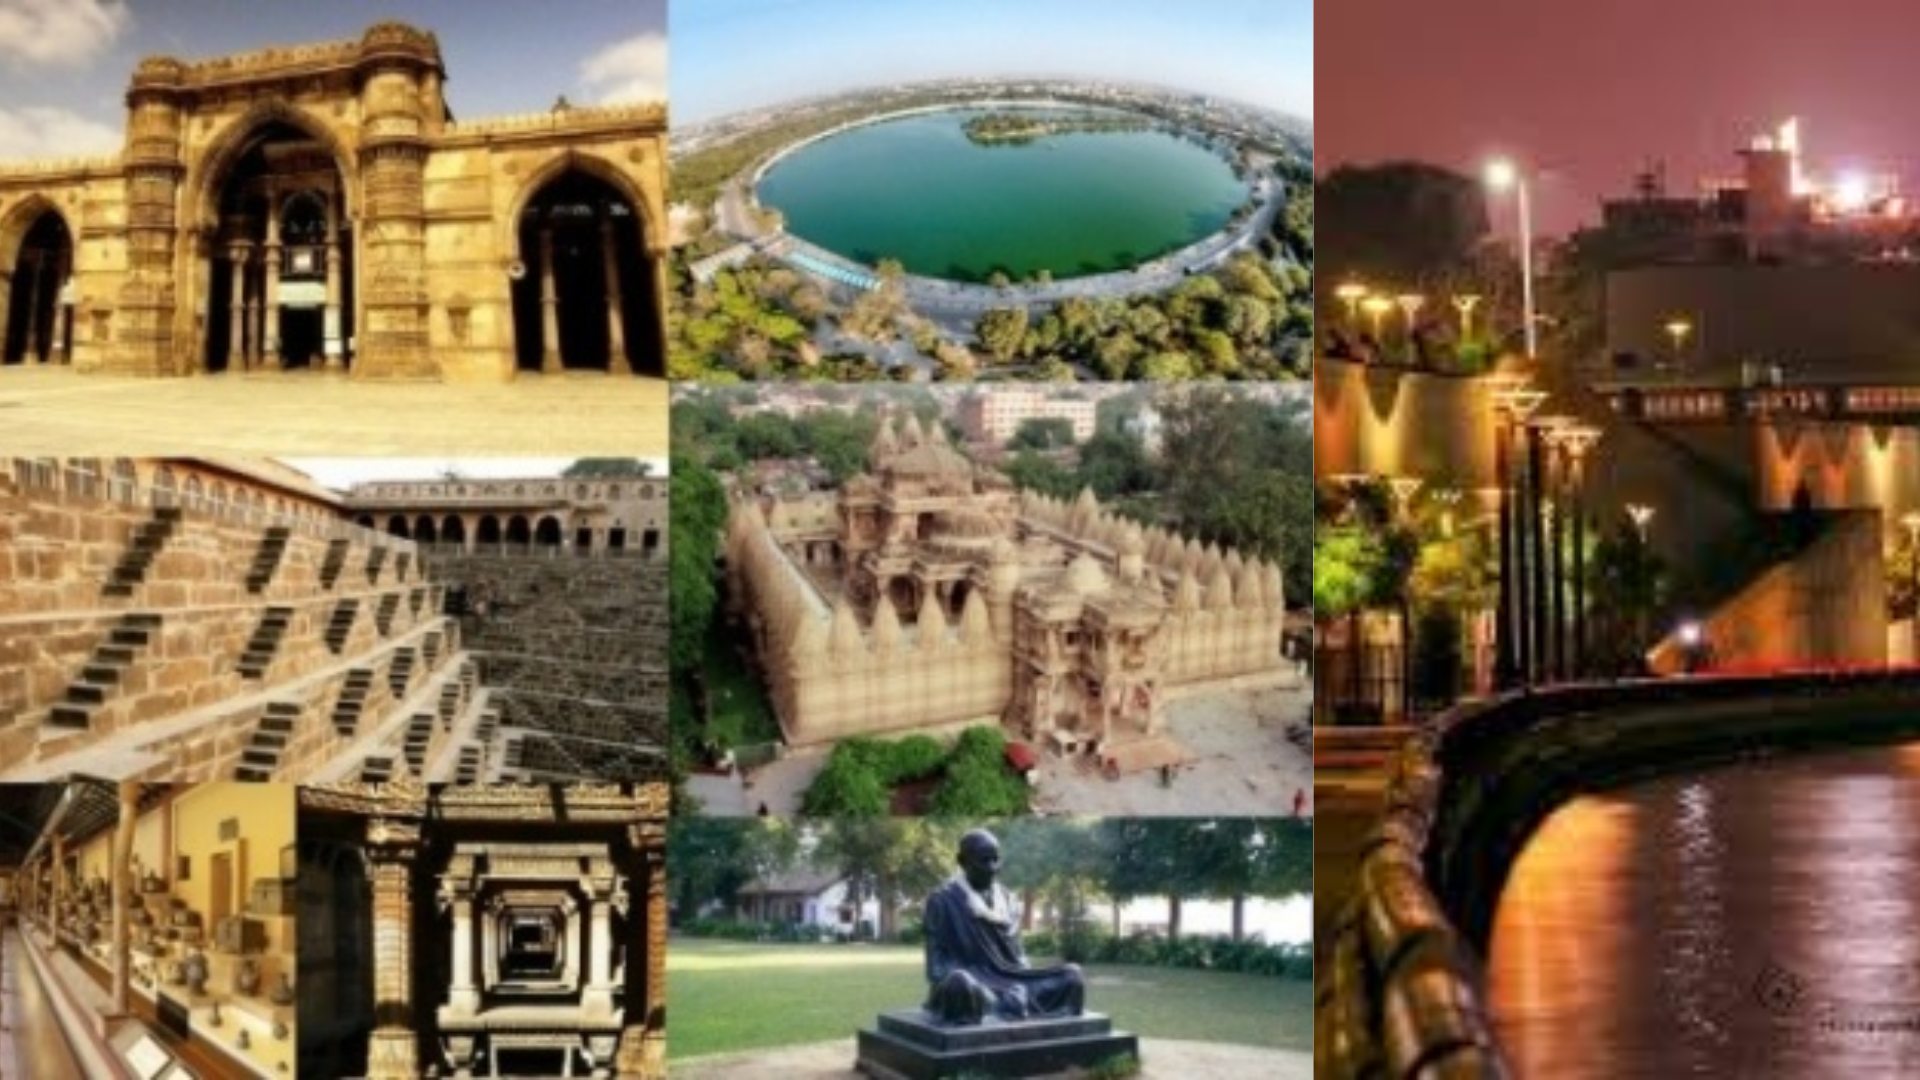 About and History of Ahmedabad